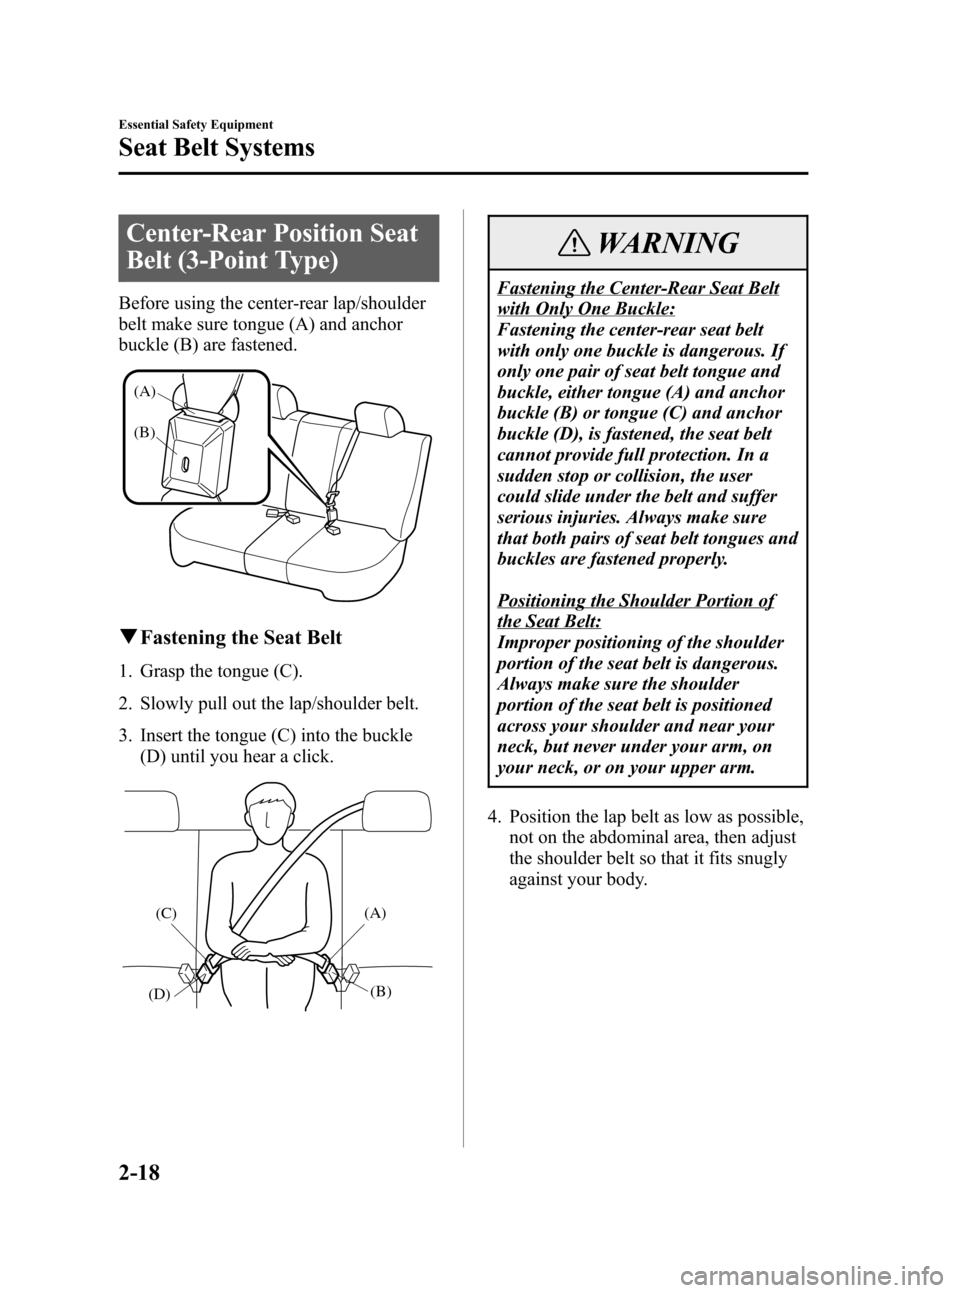 MAZDA MODEL 3 HATCHBACK 2007  Owners Manual (in English) Black plate (32,1)
Center-Rear Position Seat
Belt (3-Point Type)
Before using the center-rear lap/shoulder
belt make sure tongue (A) and anchor
buckle (B) are fastened.
(A)
(B)
qFastening the Seat Bel